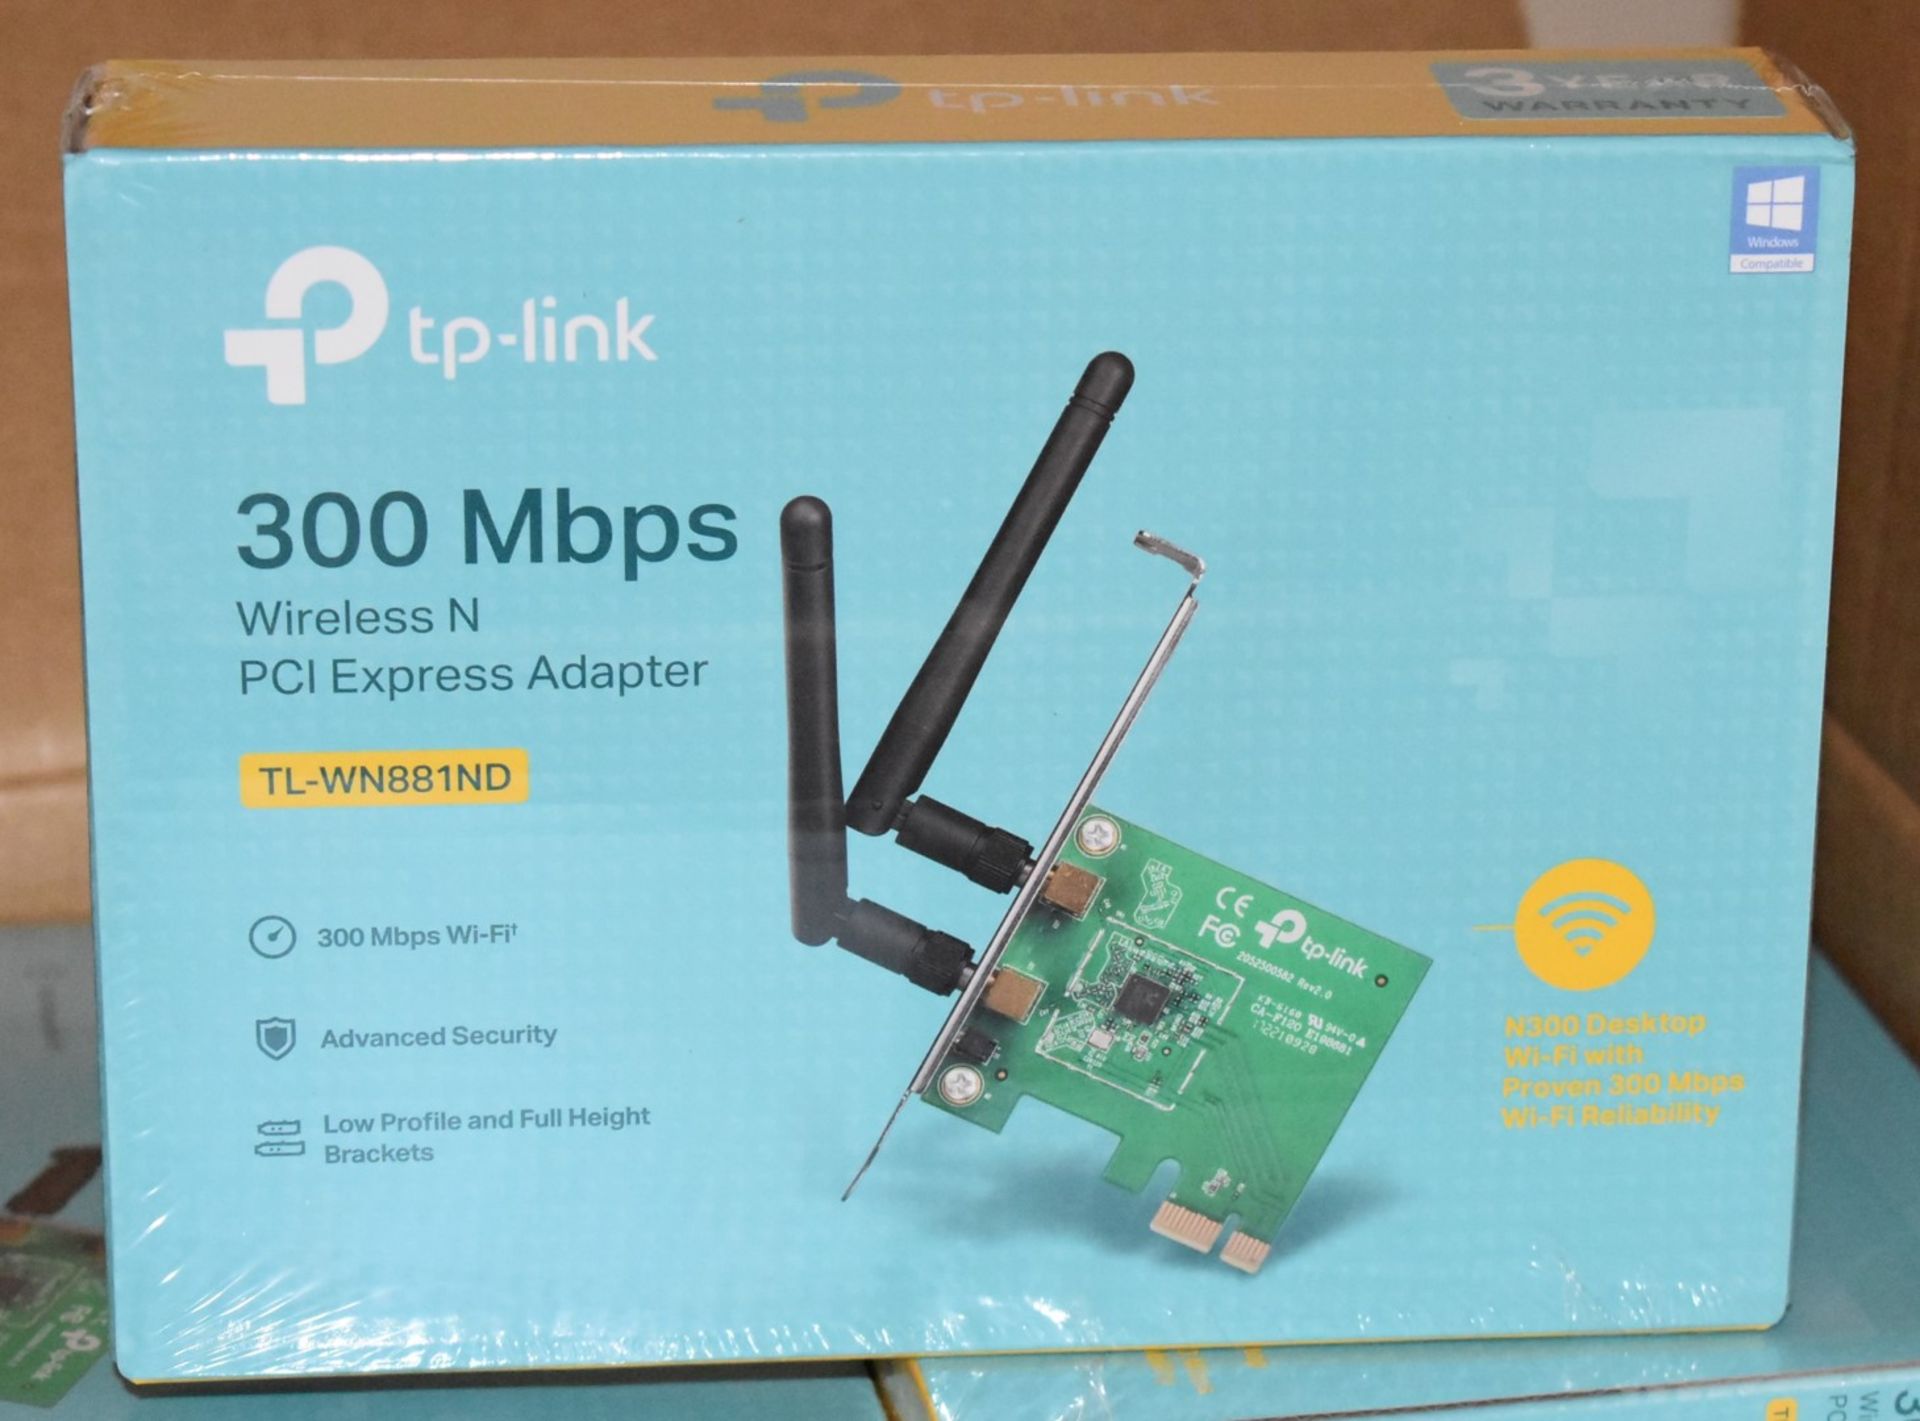 5 x TP-Link TL-WN881ND 300mbps Wireless N Pci Express Adapters - New Boxed Stock - RRP £80 - Ref: - Image 2 of 2